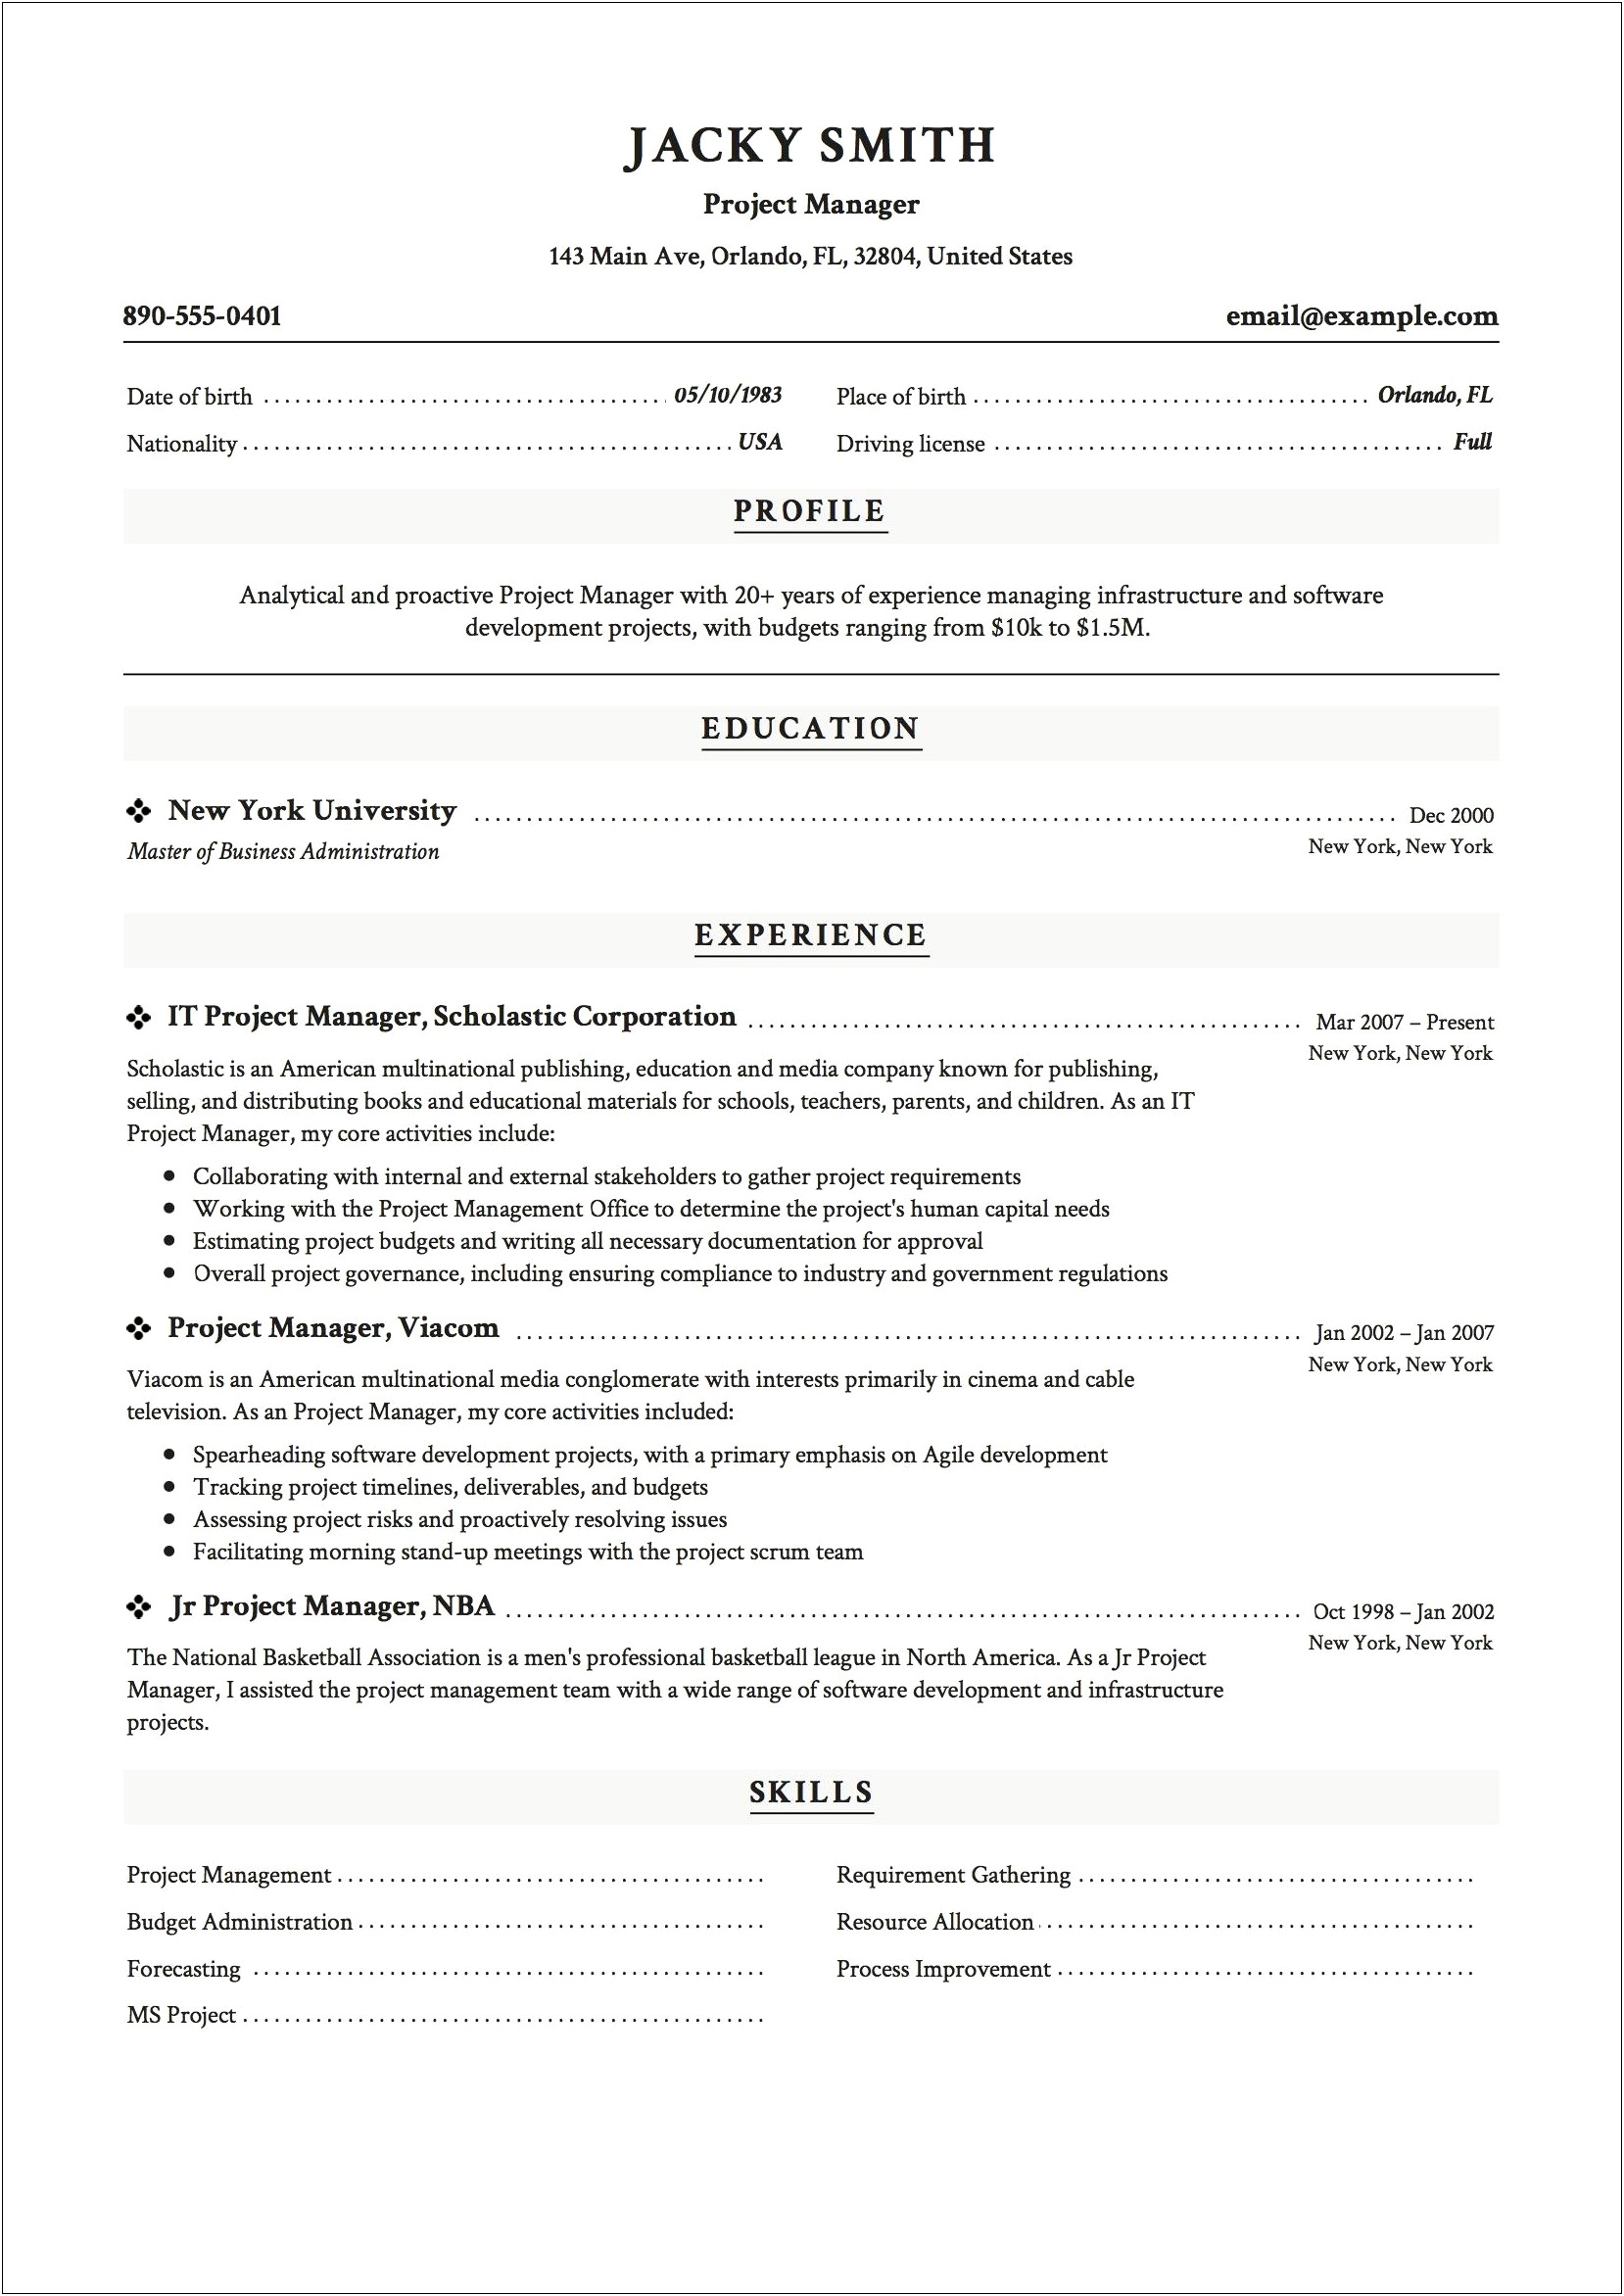 Functional Resume Examples Project Manager